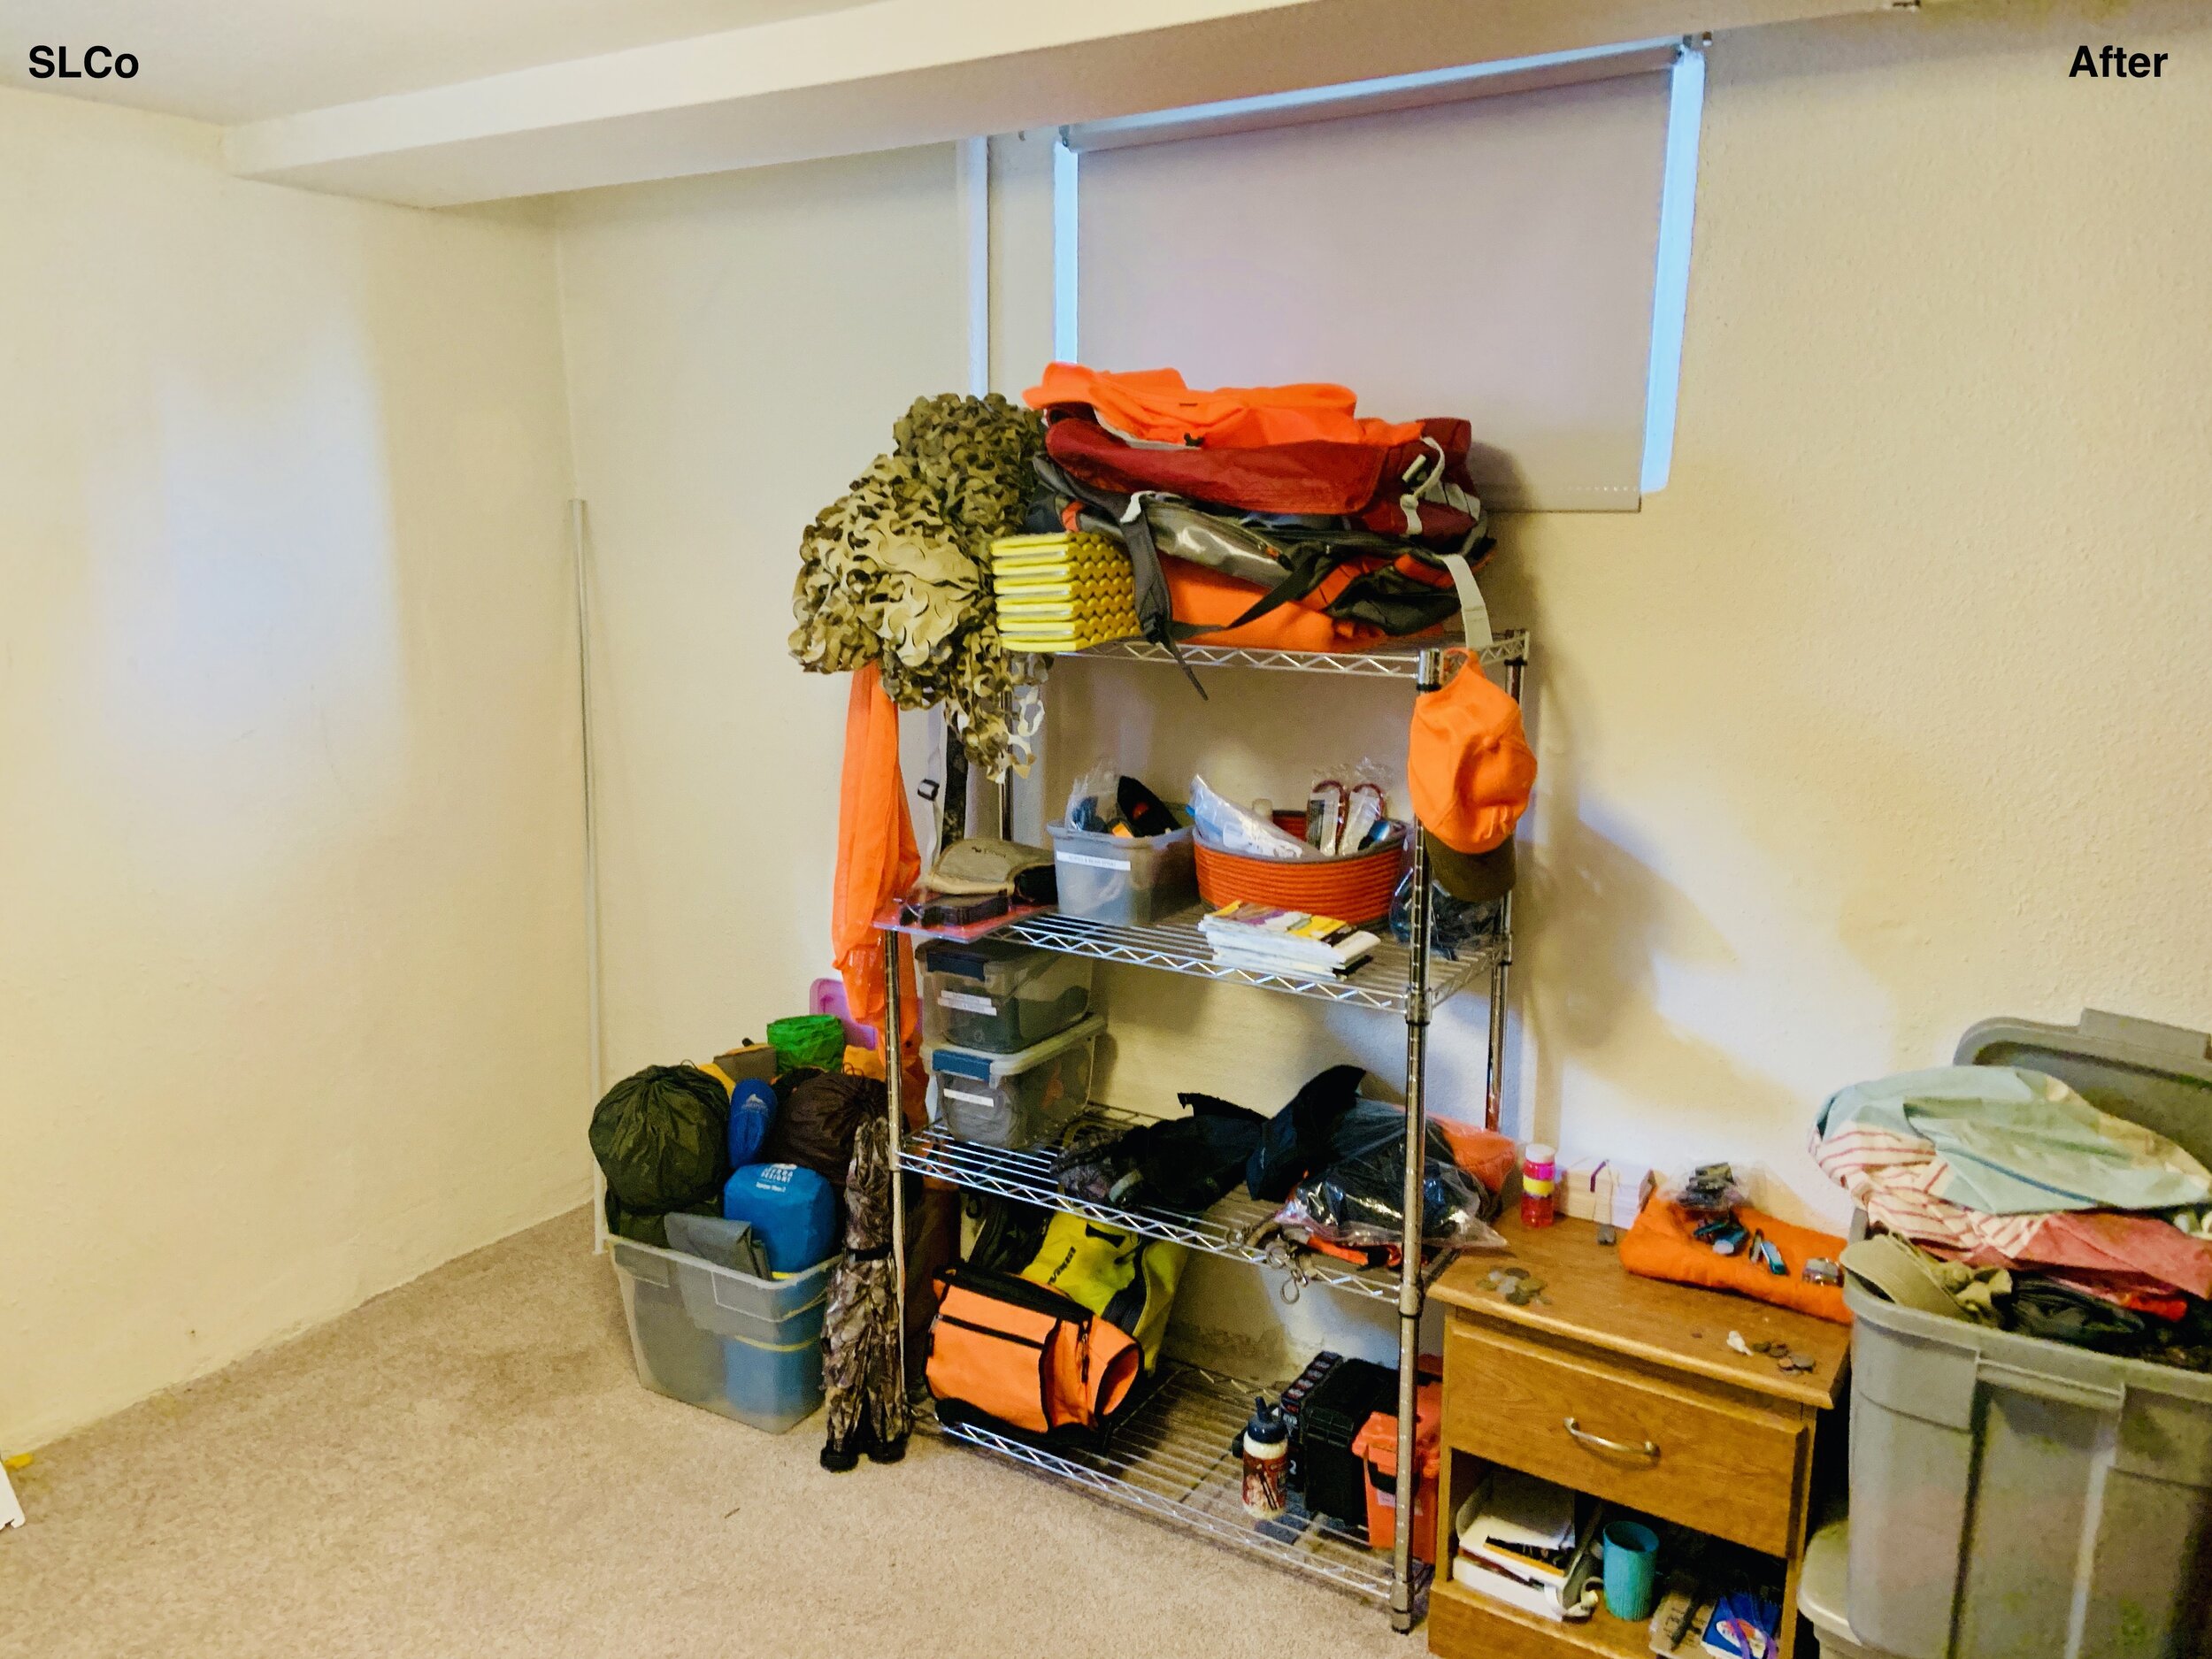 After photo of corner of a room with shelving unit with bags on it and floor cleared.